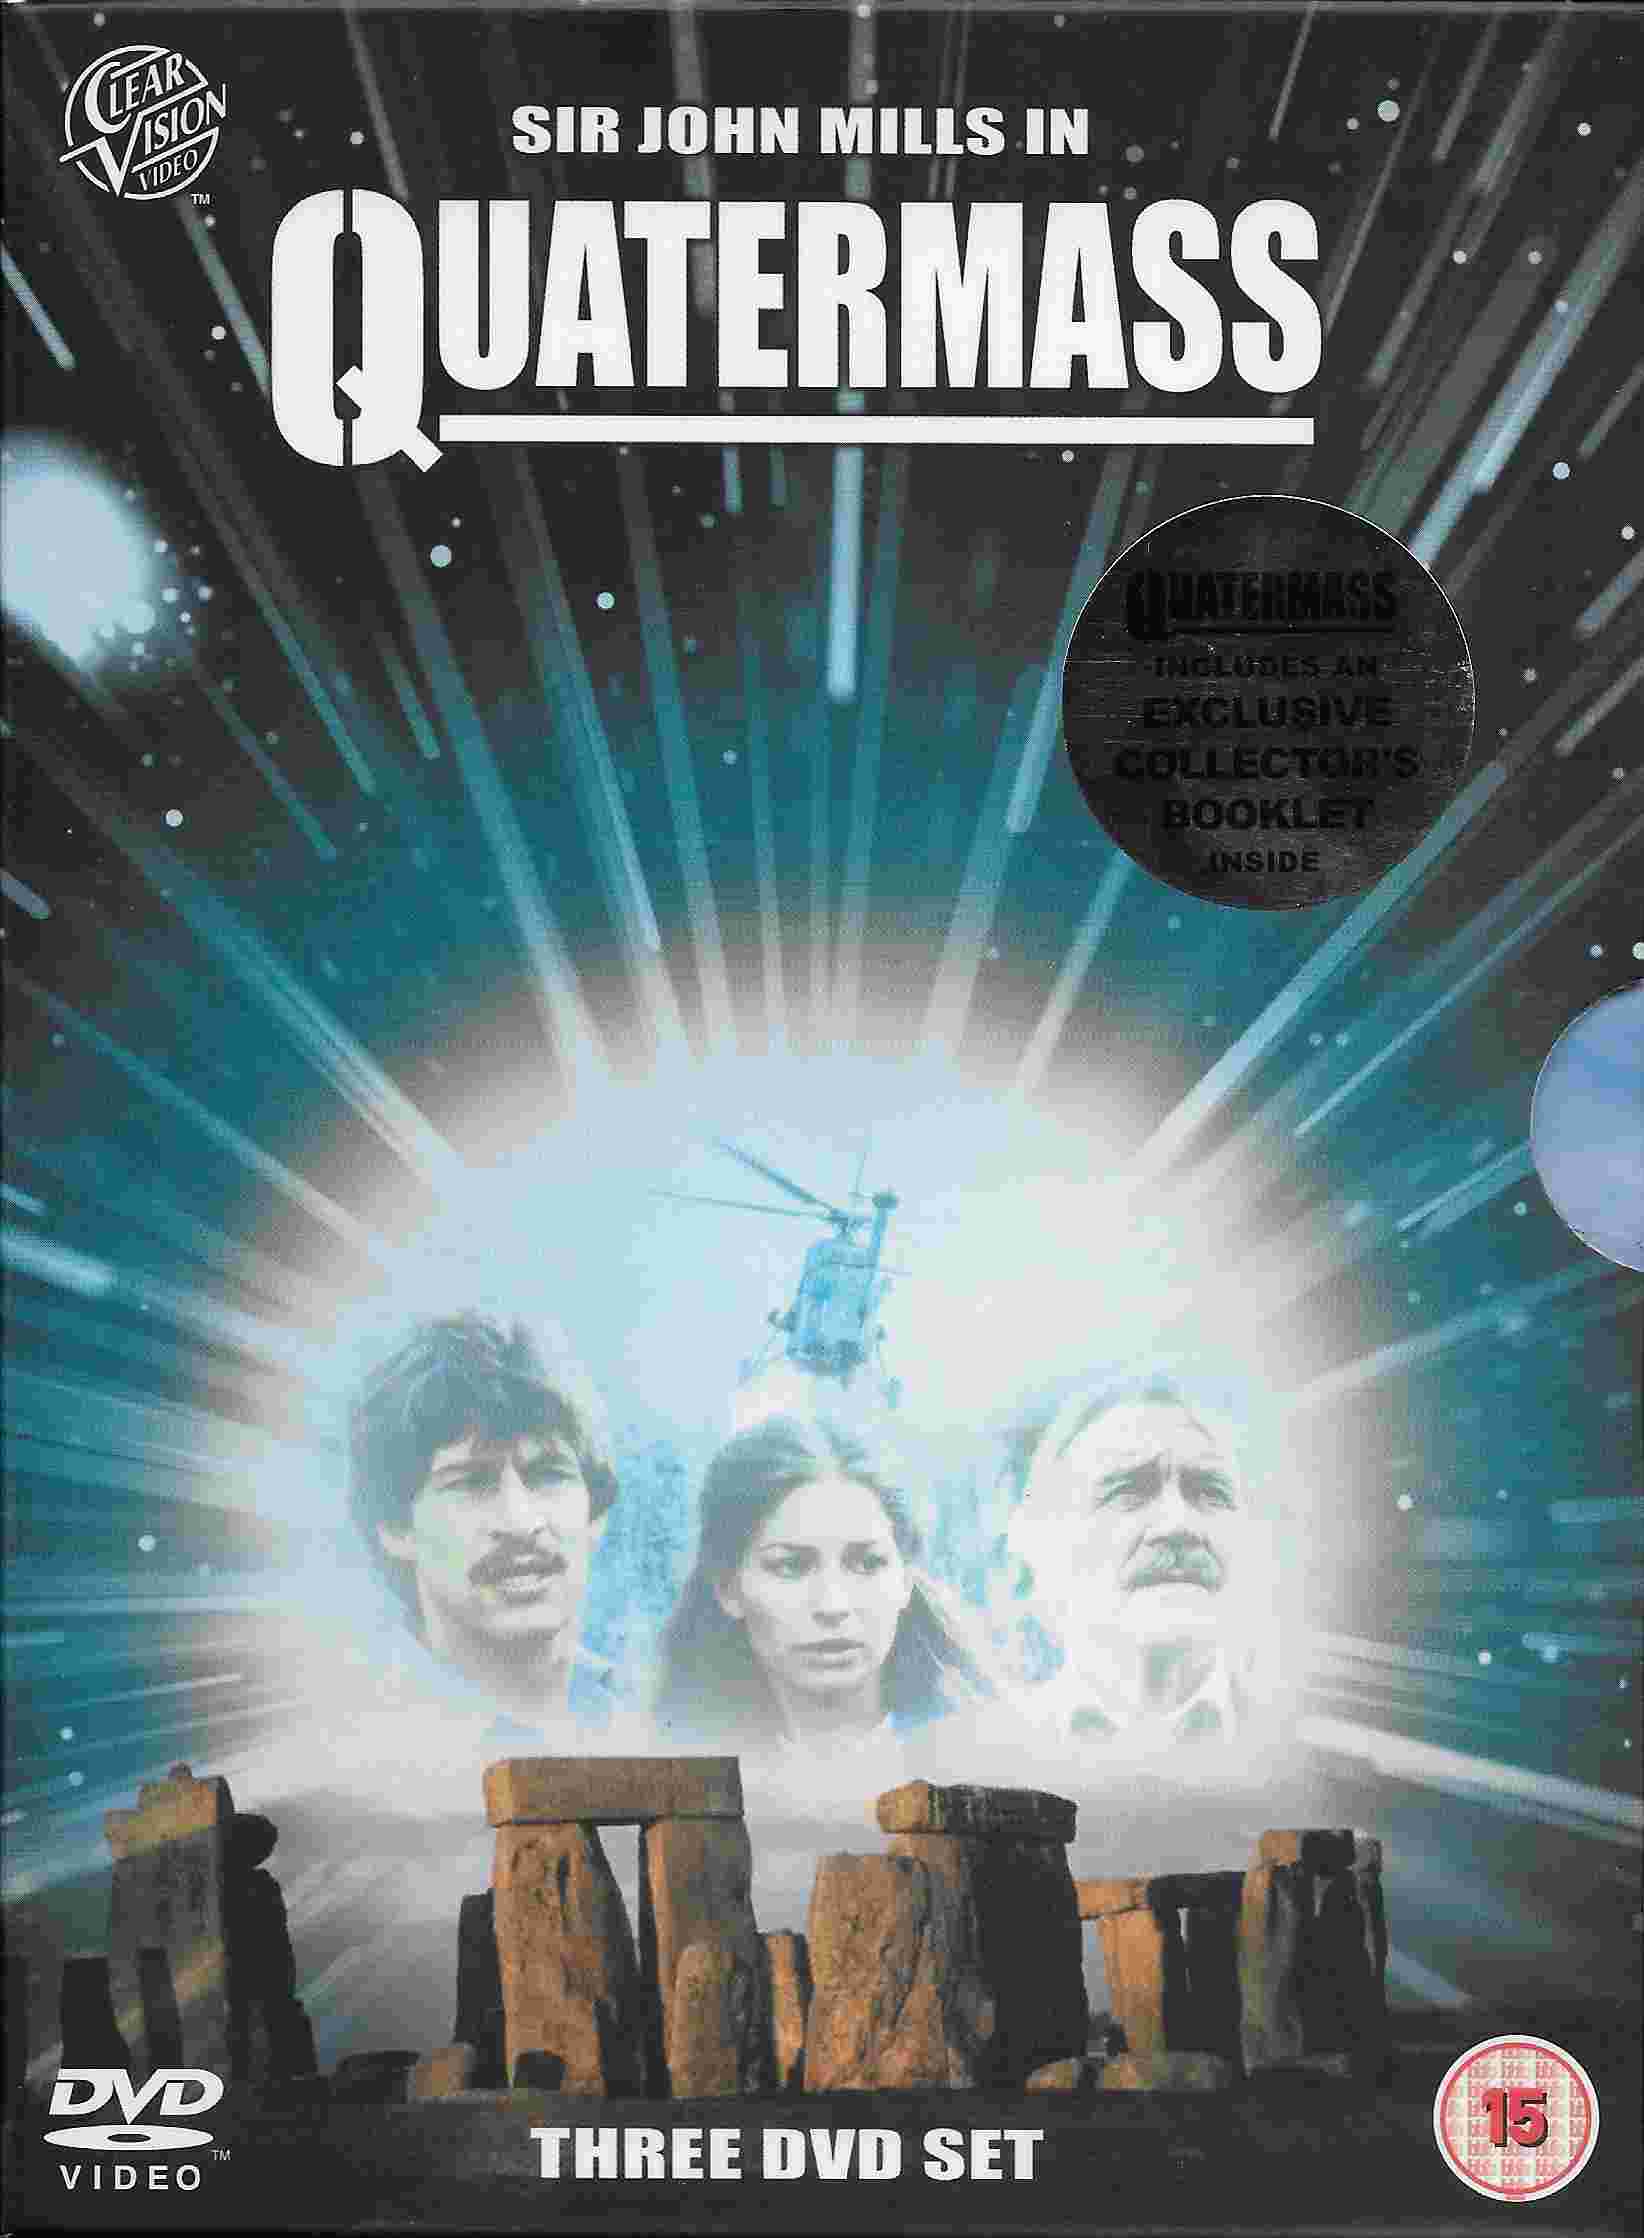 Picture of Quatermass by artist Nigel Kneale from ITV, Channel 4 and Channel 5 dvds library